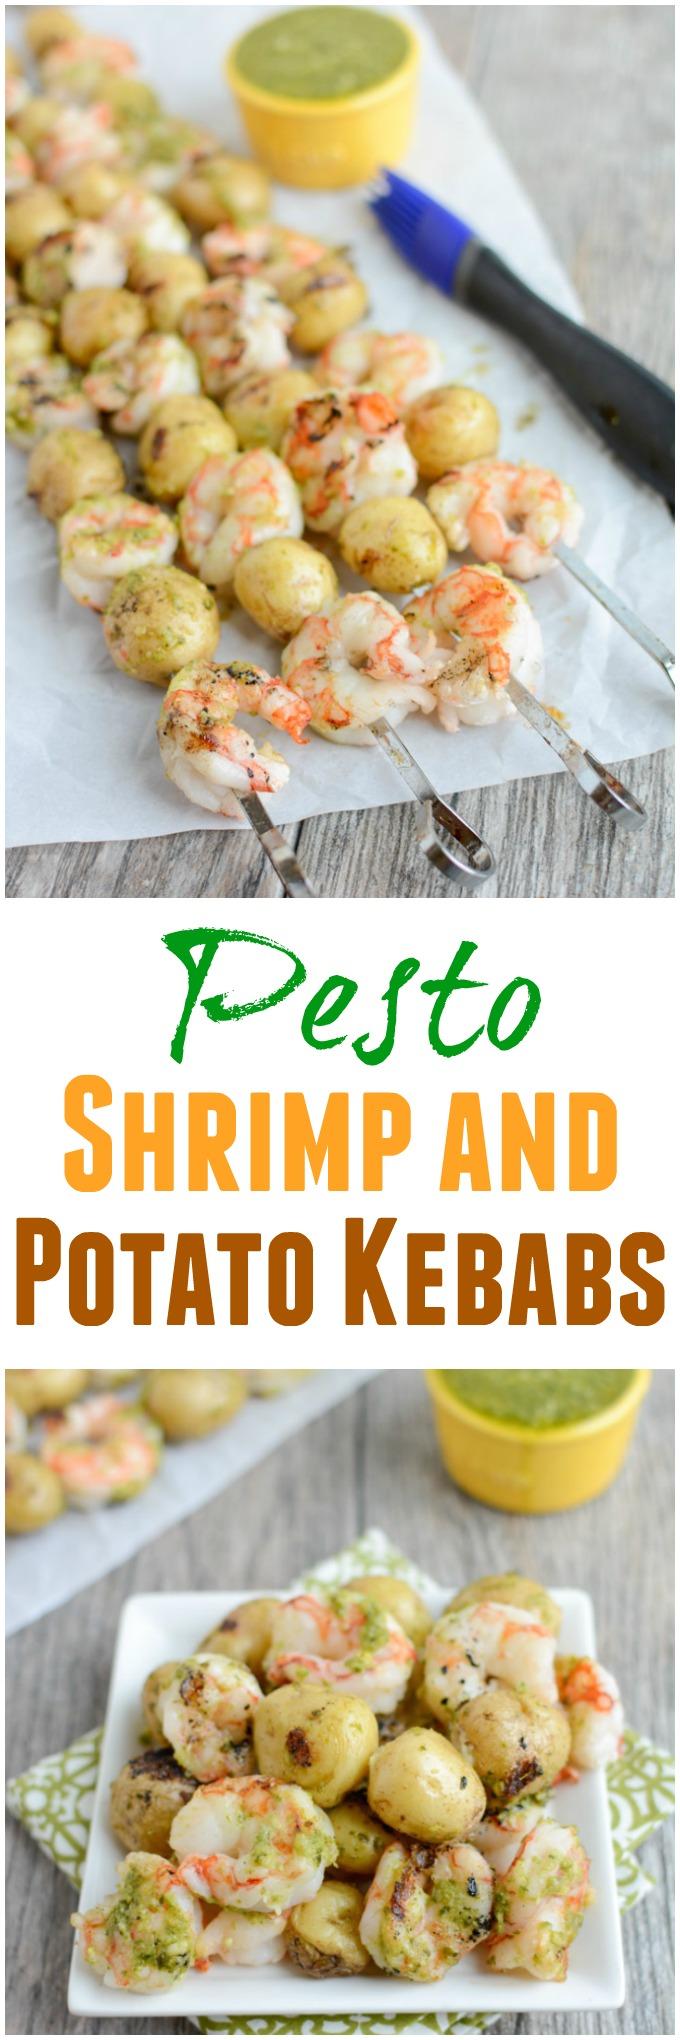 These Pesto Shrimp and Potato Kebabs are made with just a few ingredients and cook quickly on the grill for an easy summer dinner. 